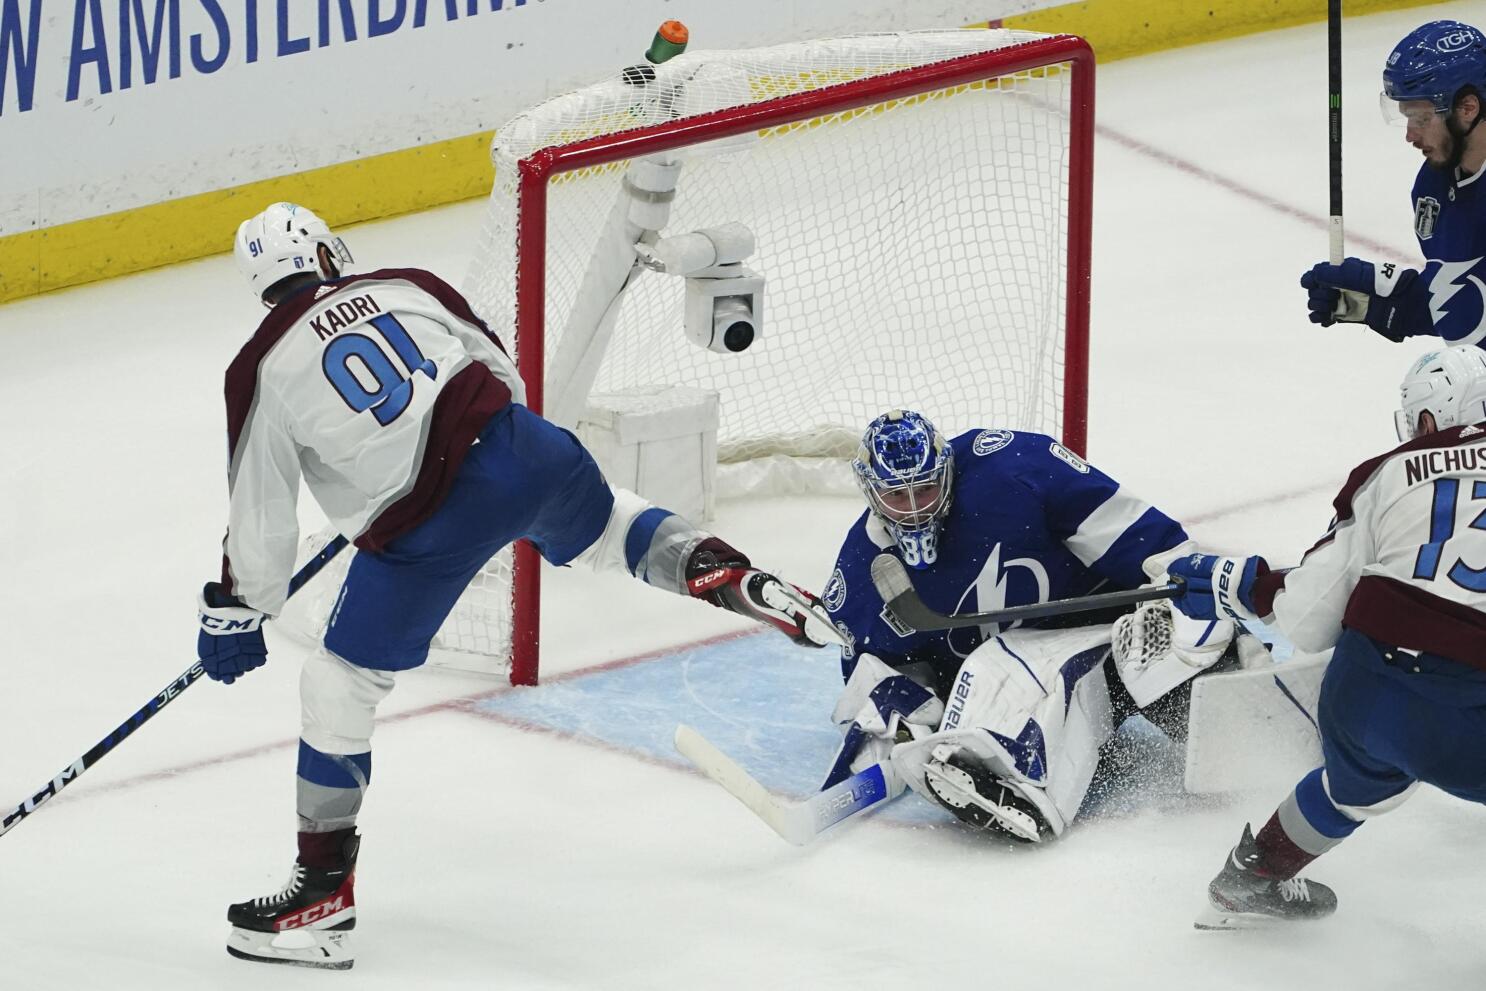 Leafs' power play comes to life in win over Avalanche 